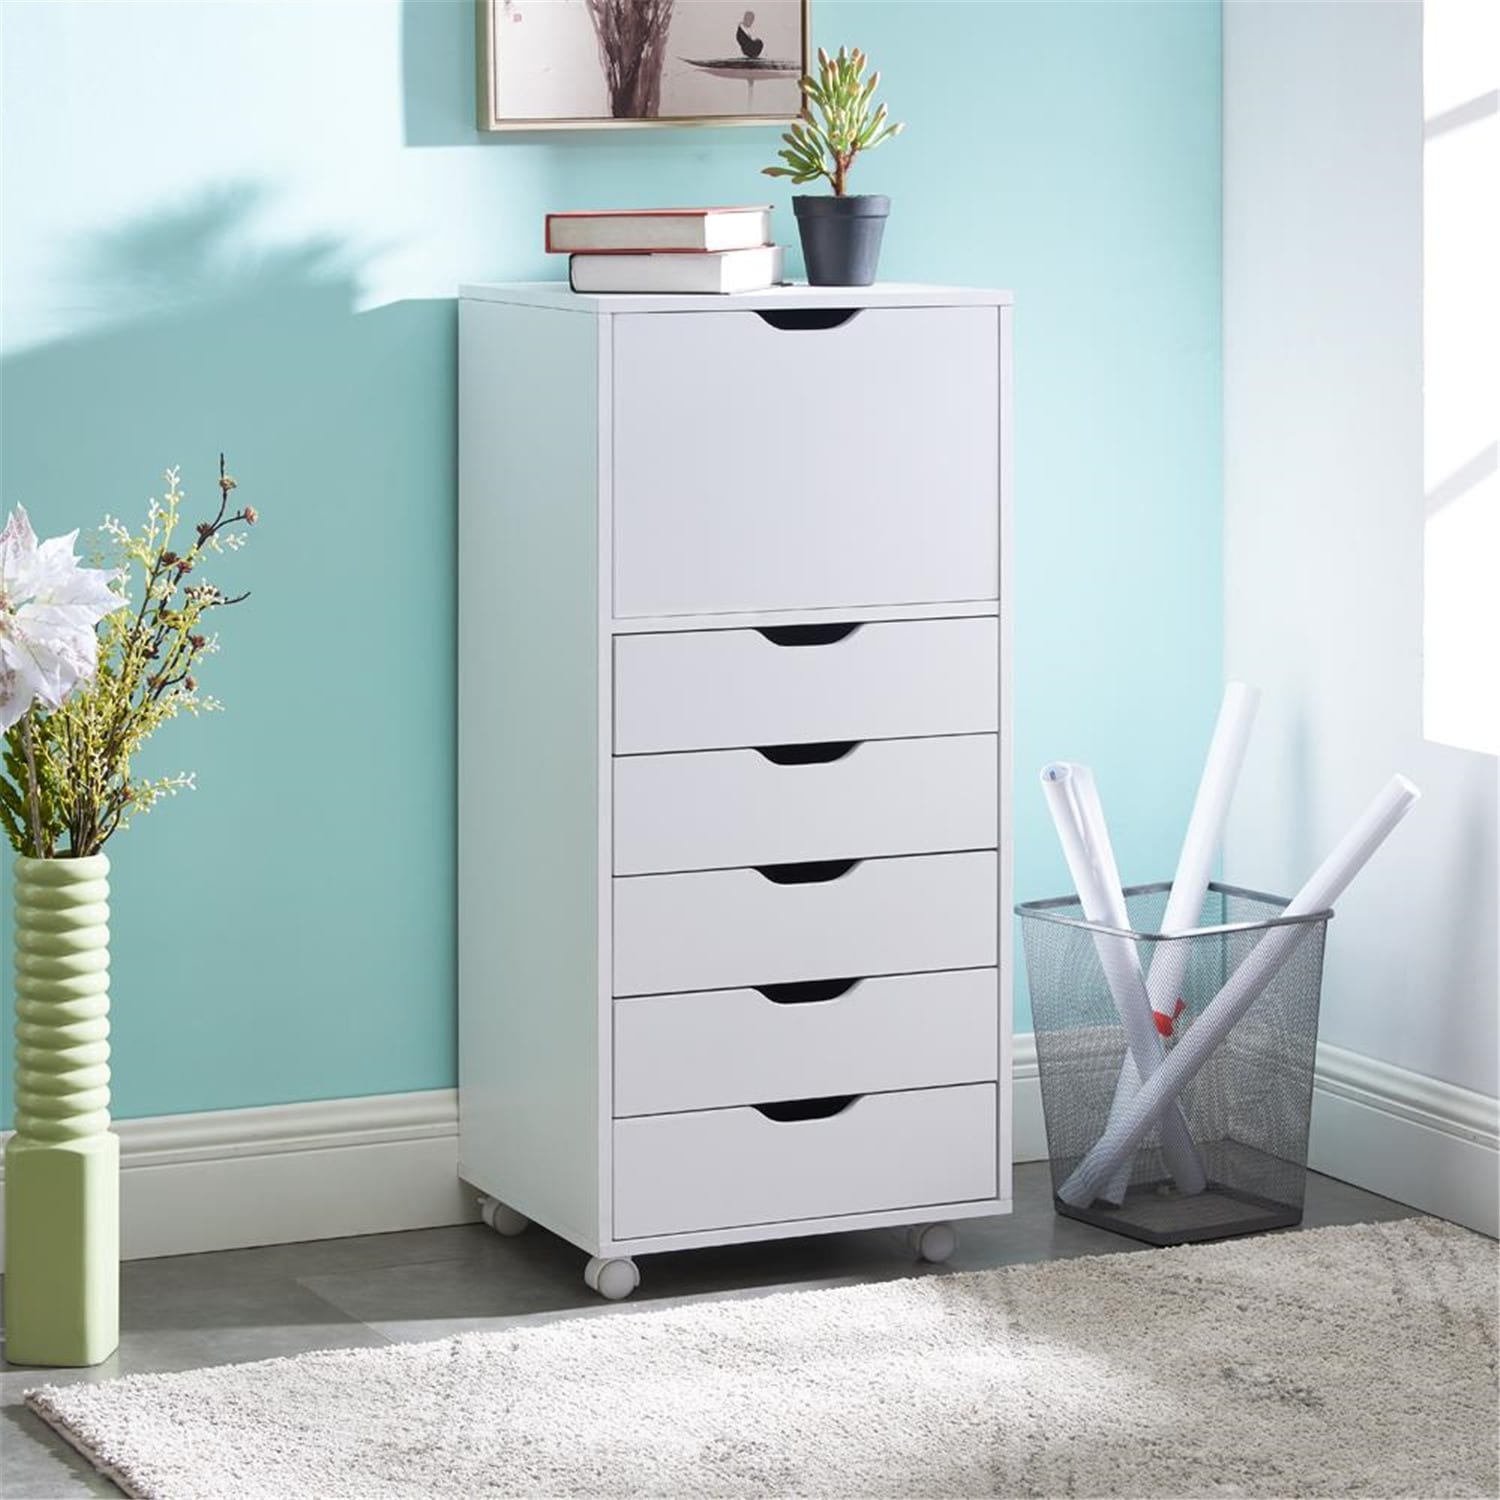 https://ak1.ostkcdn.com/images/products/is/images/direct/6e46721ac4f4f0309f03bd45a3e3f055708491b3/Naomi-Home-Carly-6-Drawer-Office-Storage-Cabinet%2C-White.jpg